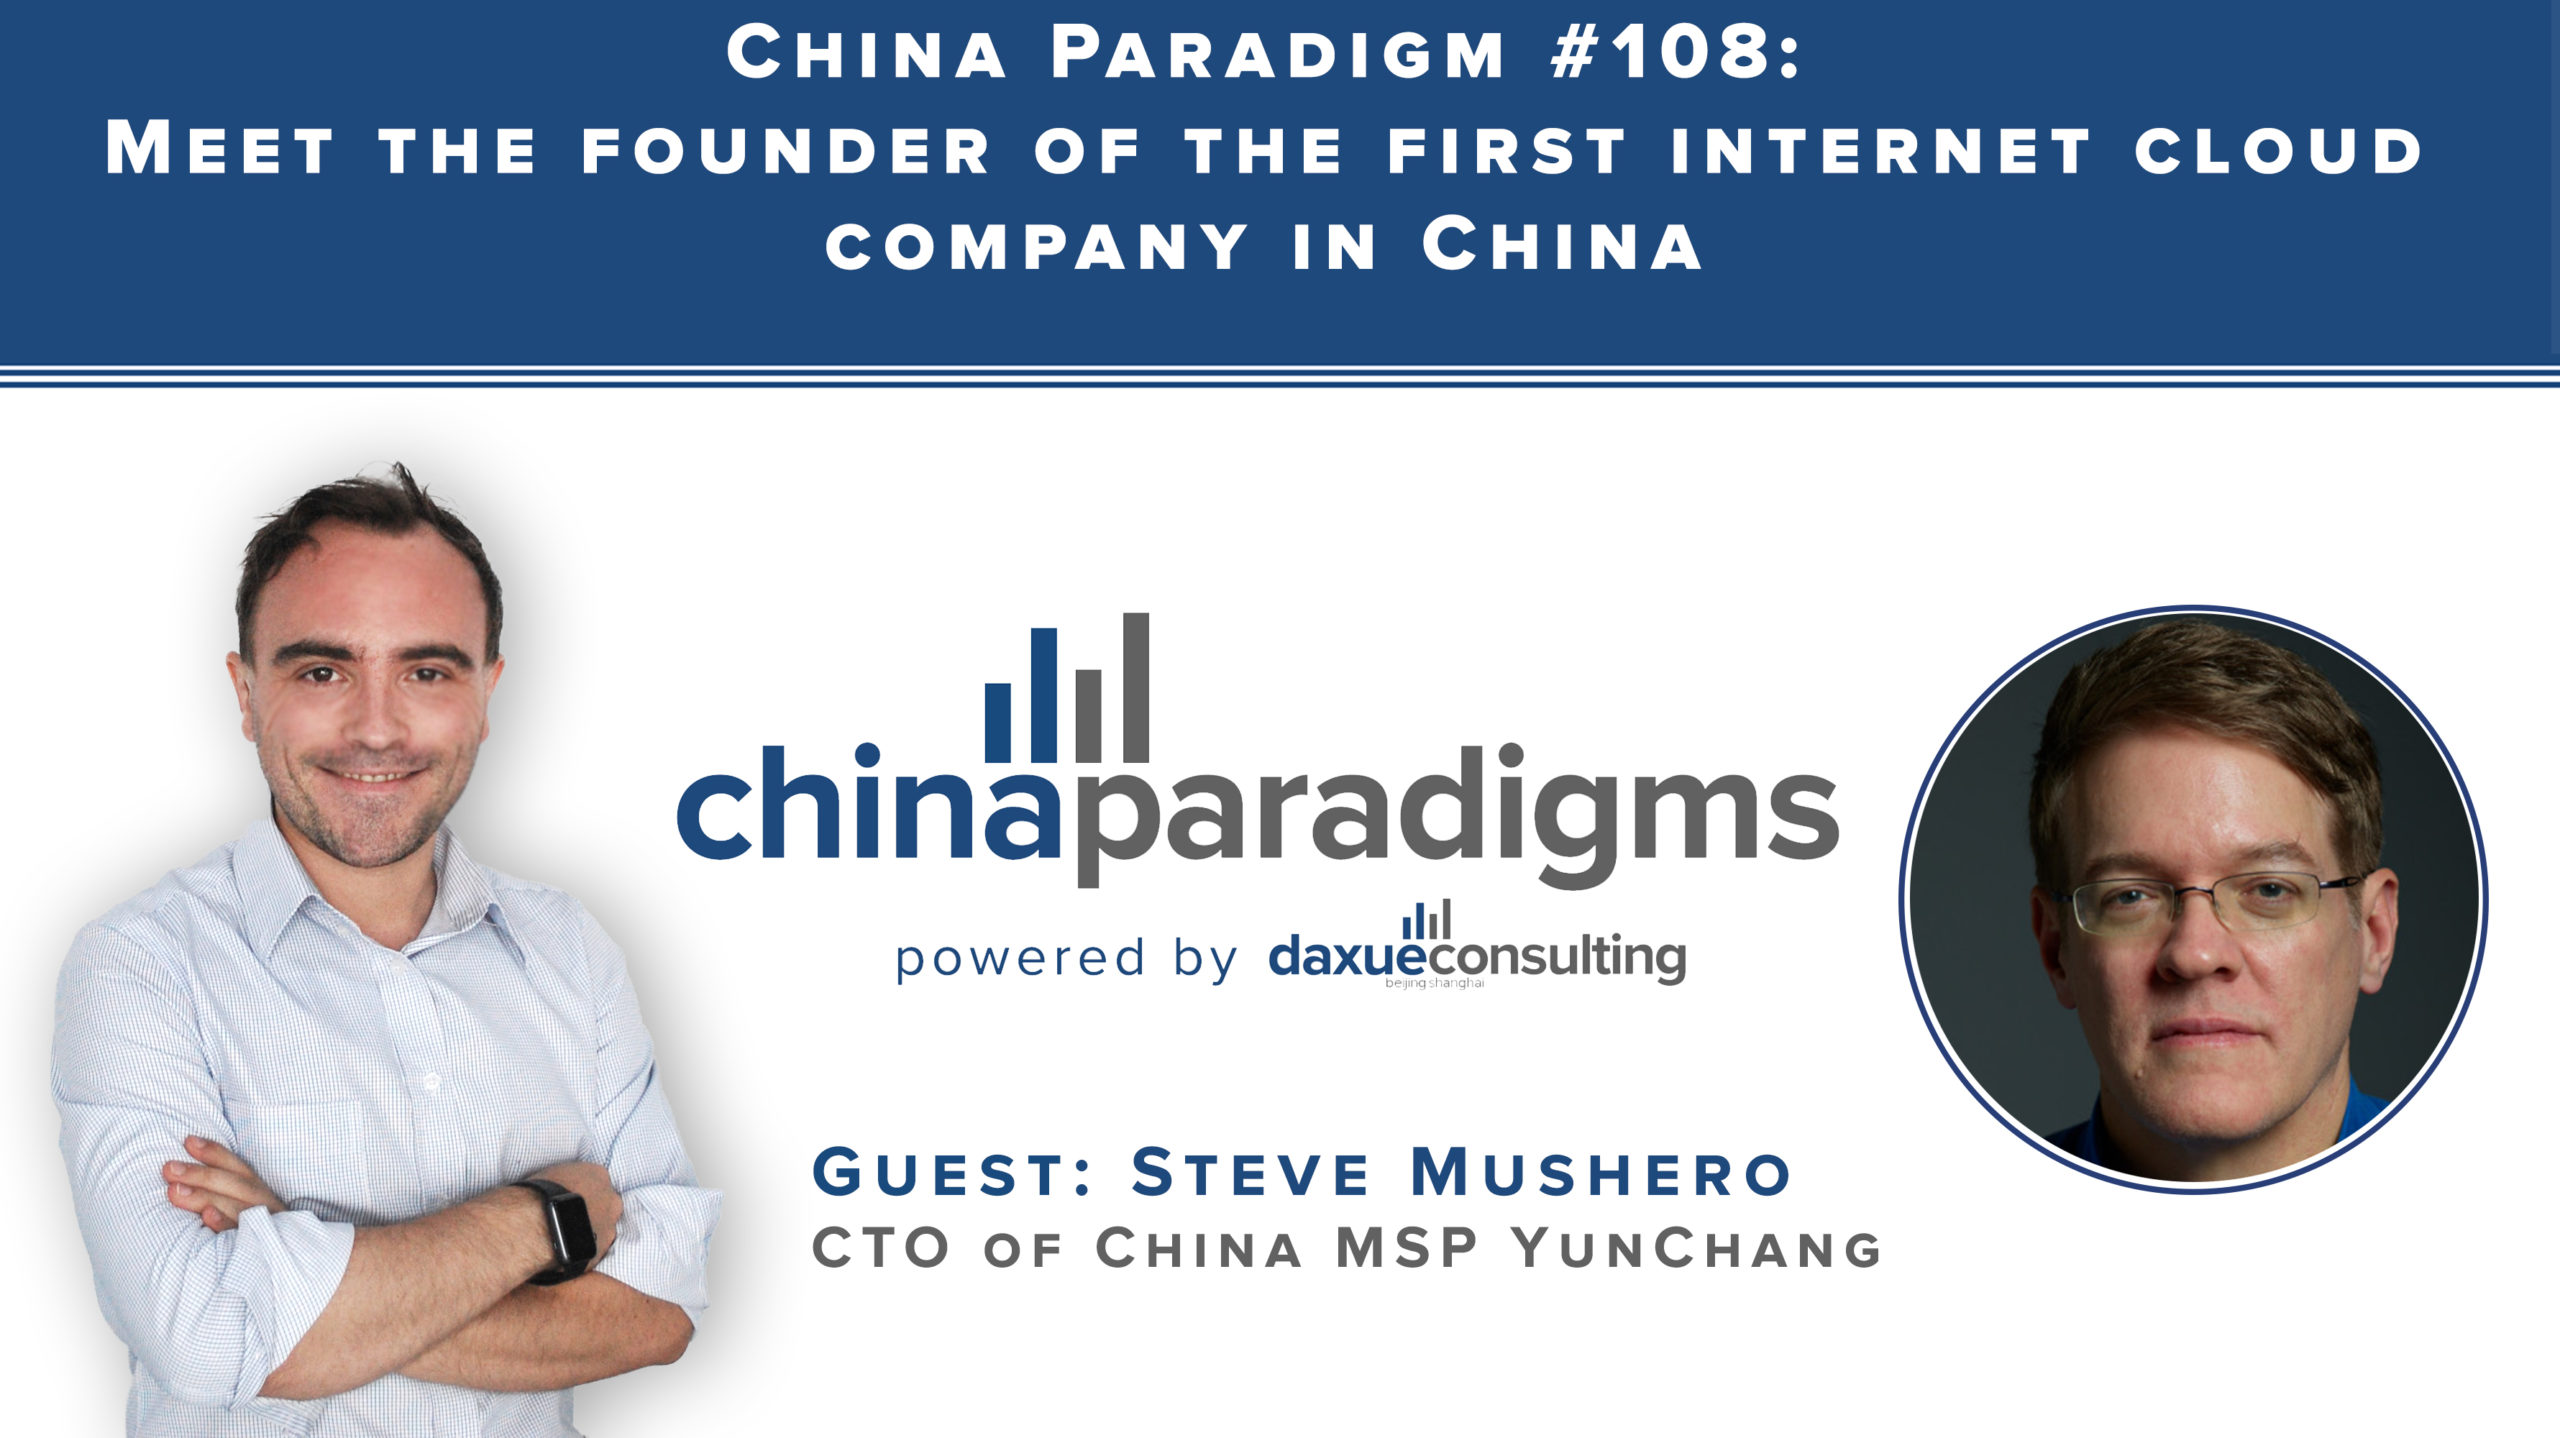 China Paradigm 108: Meet the founder of the fist internet cloud company in China